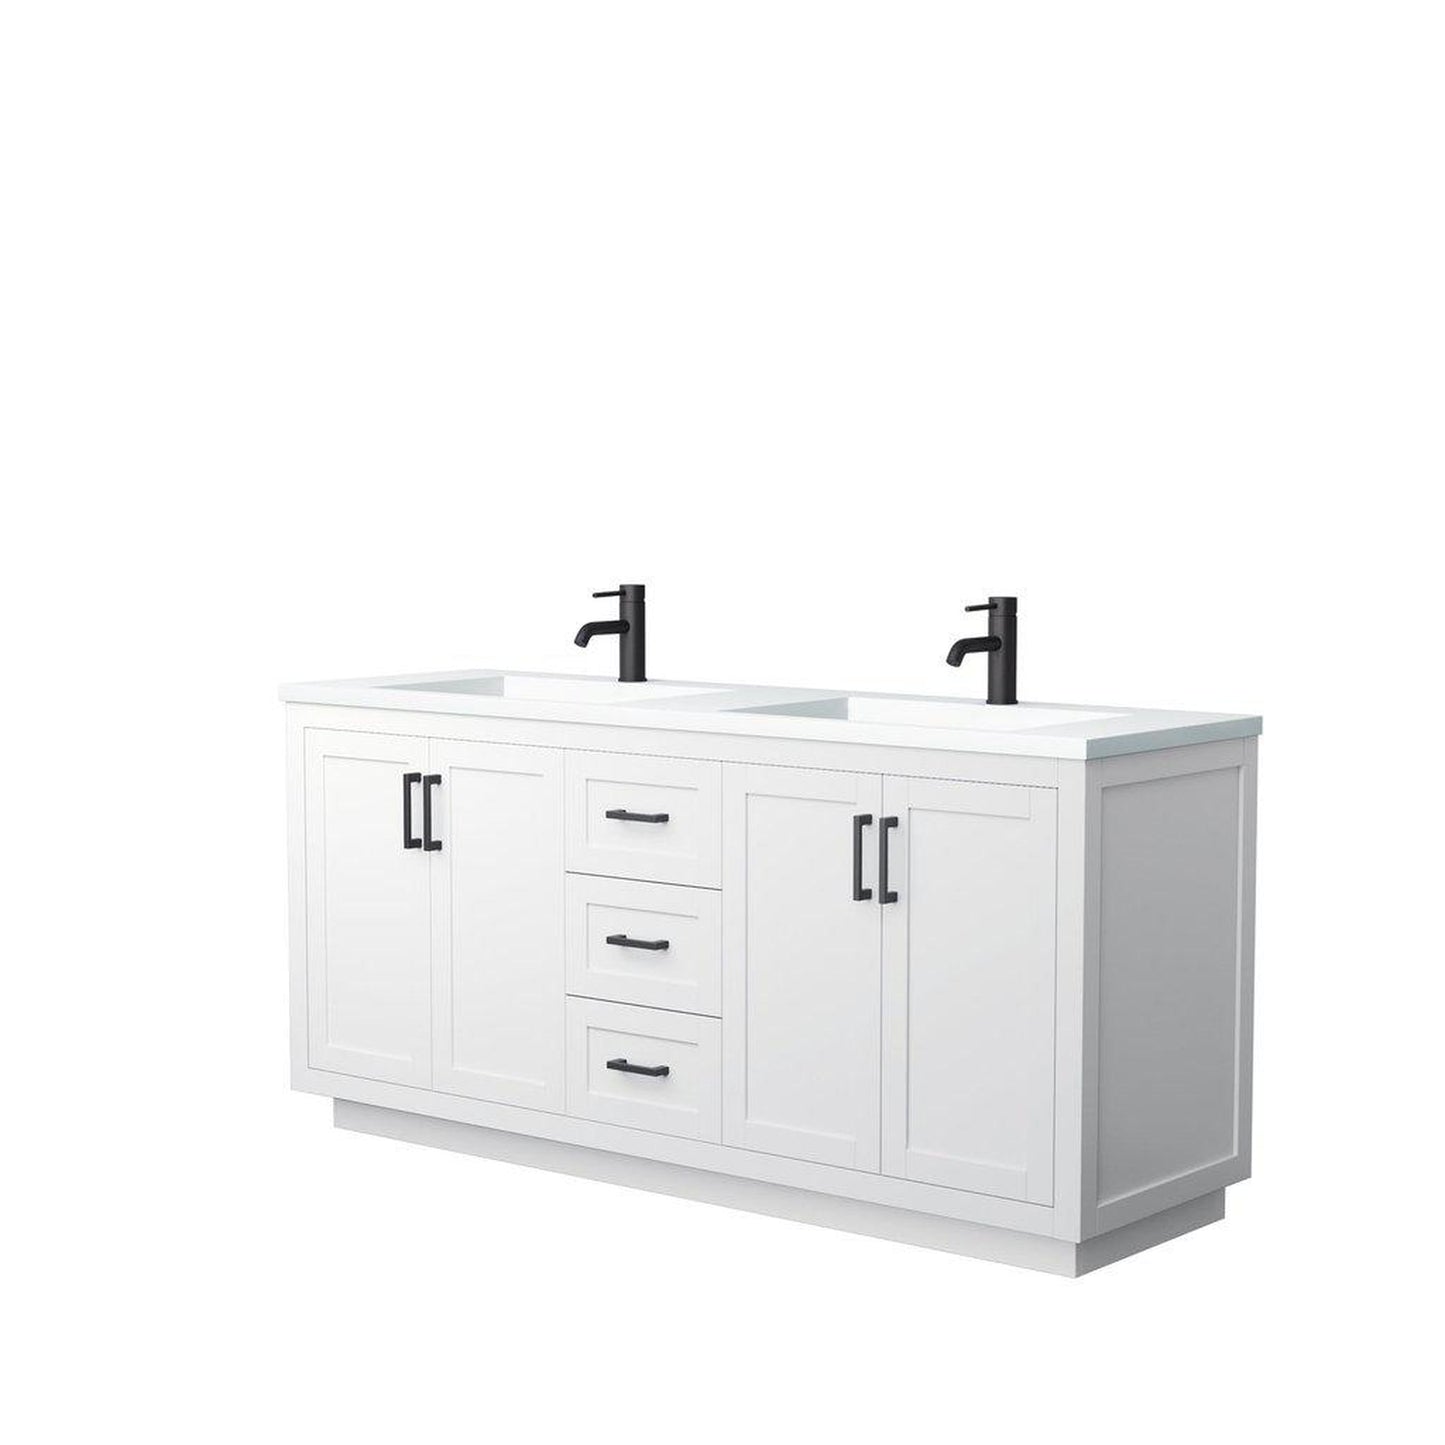 Wyndham Collection Miranda 72" Double Bathroom White Vanity Set With 1.25" Thick Matte White Solid Surface Countertop, Integrated Sink, And Matte Black Trim